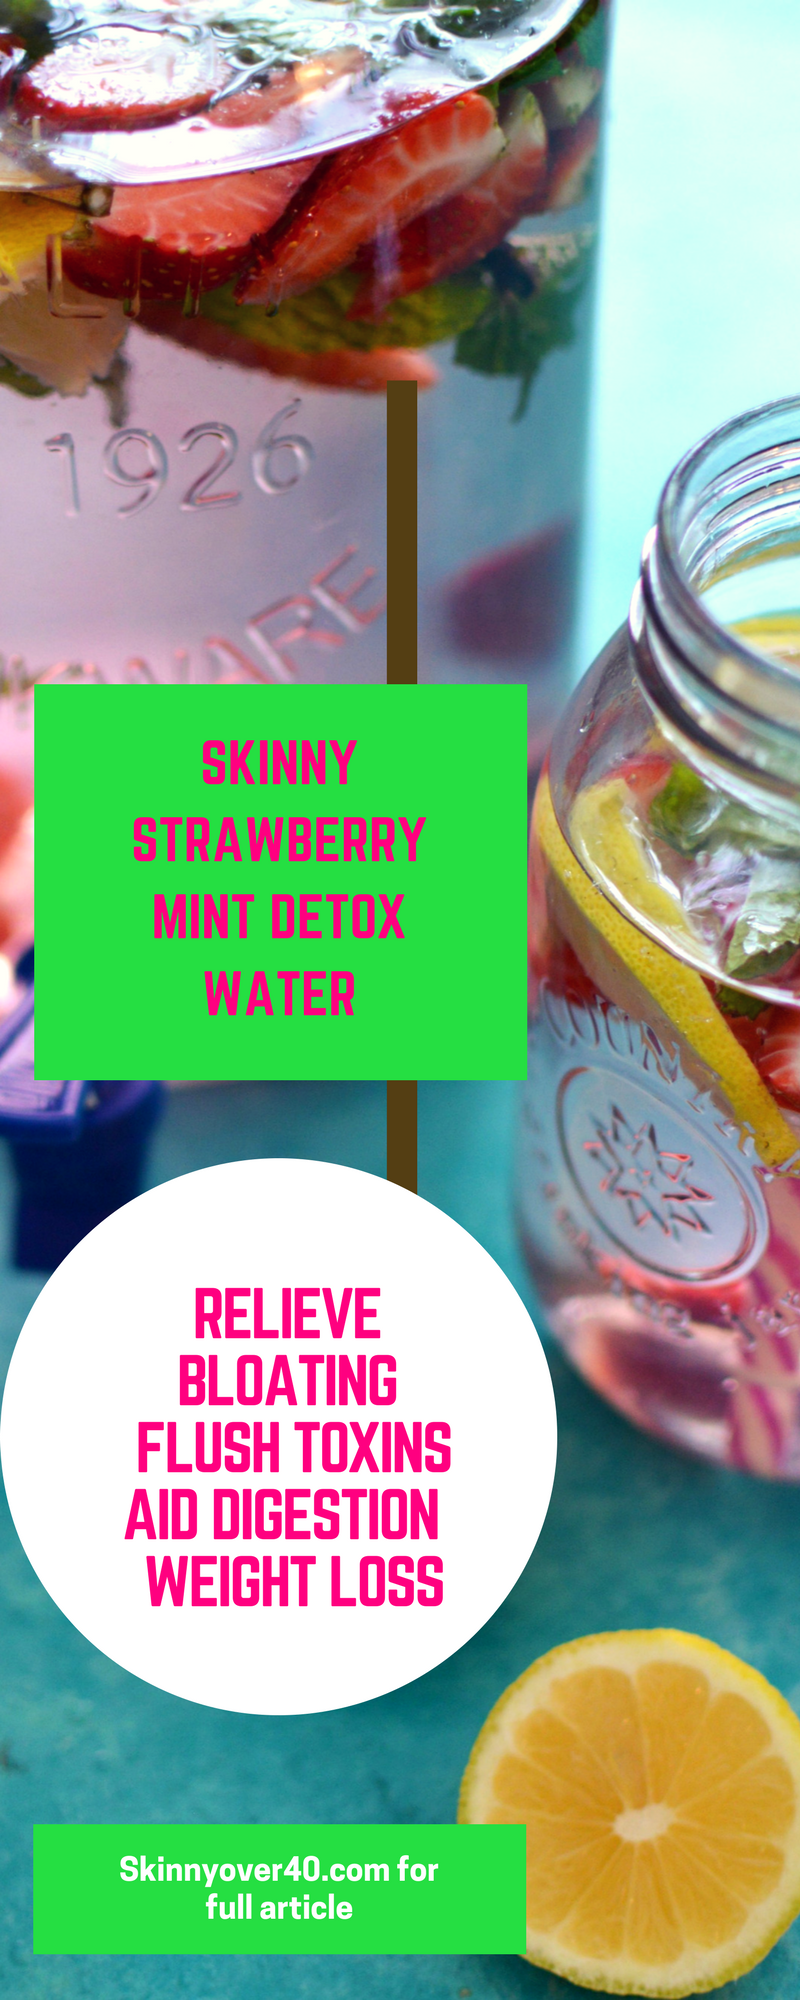 Detox water to flush toxins, lose weight, crash your weight loss goals. Cleanse your system.